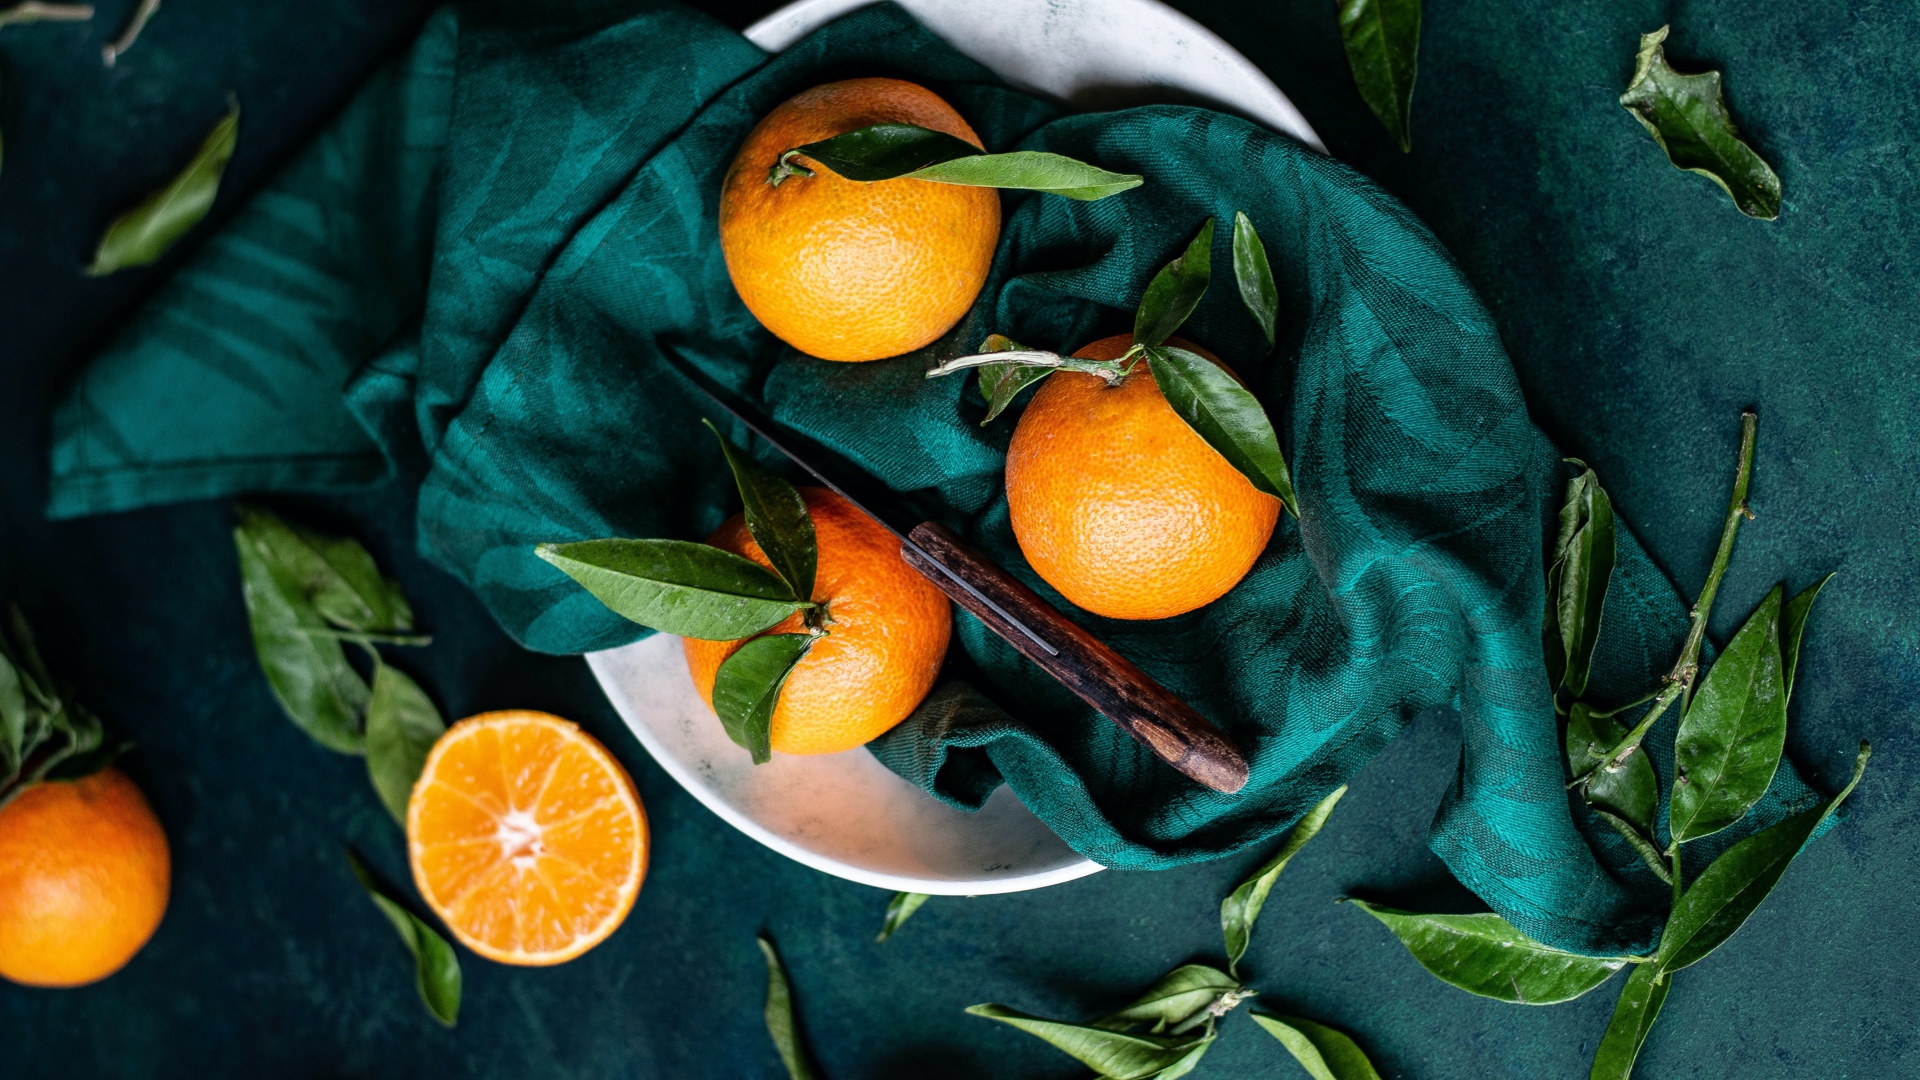 Ripe tangerines on the table in a scarf